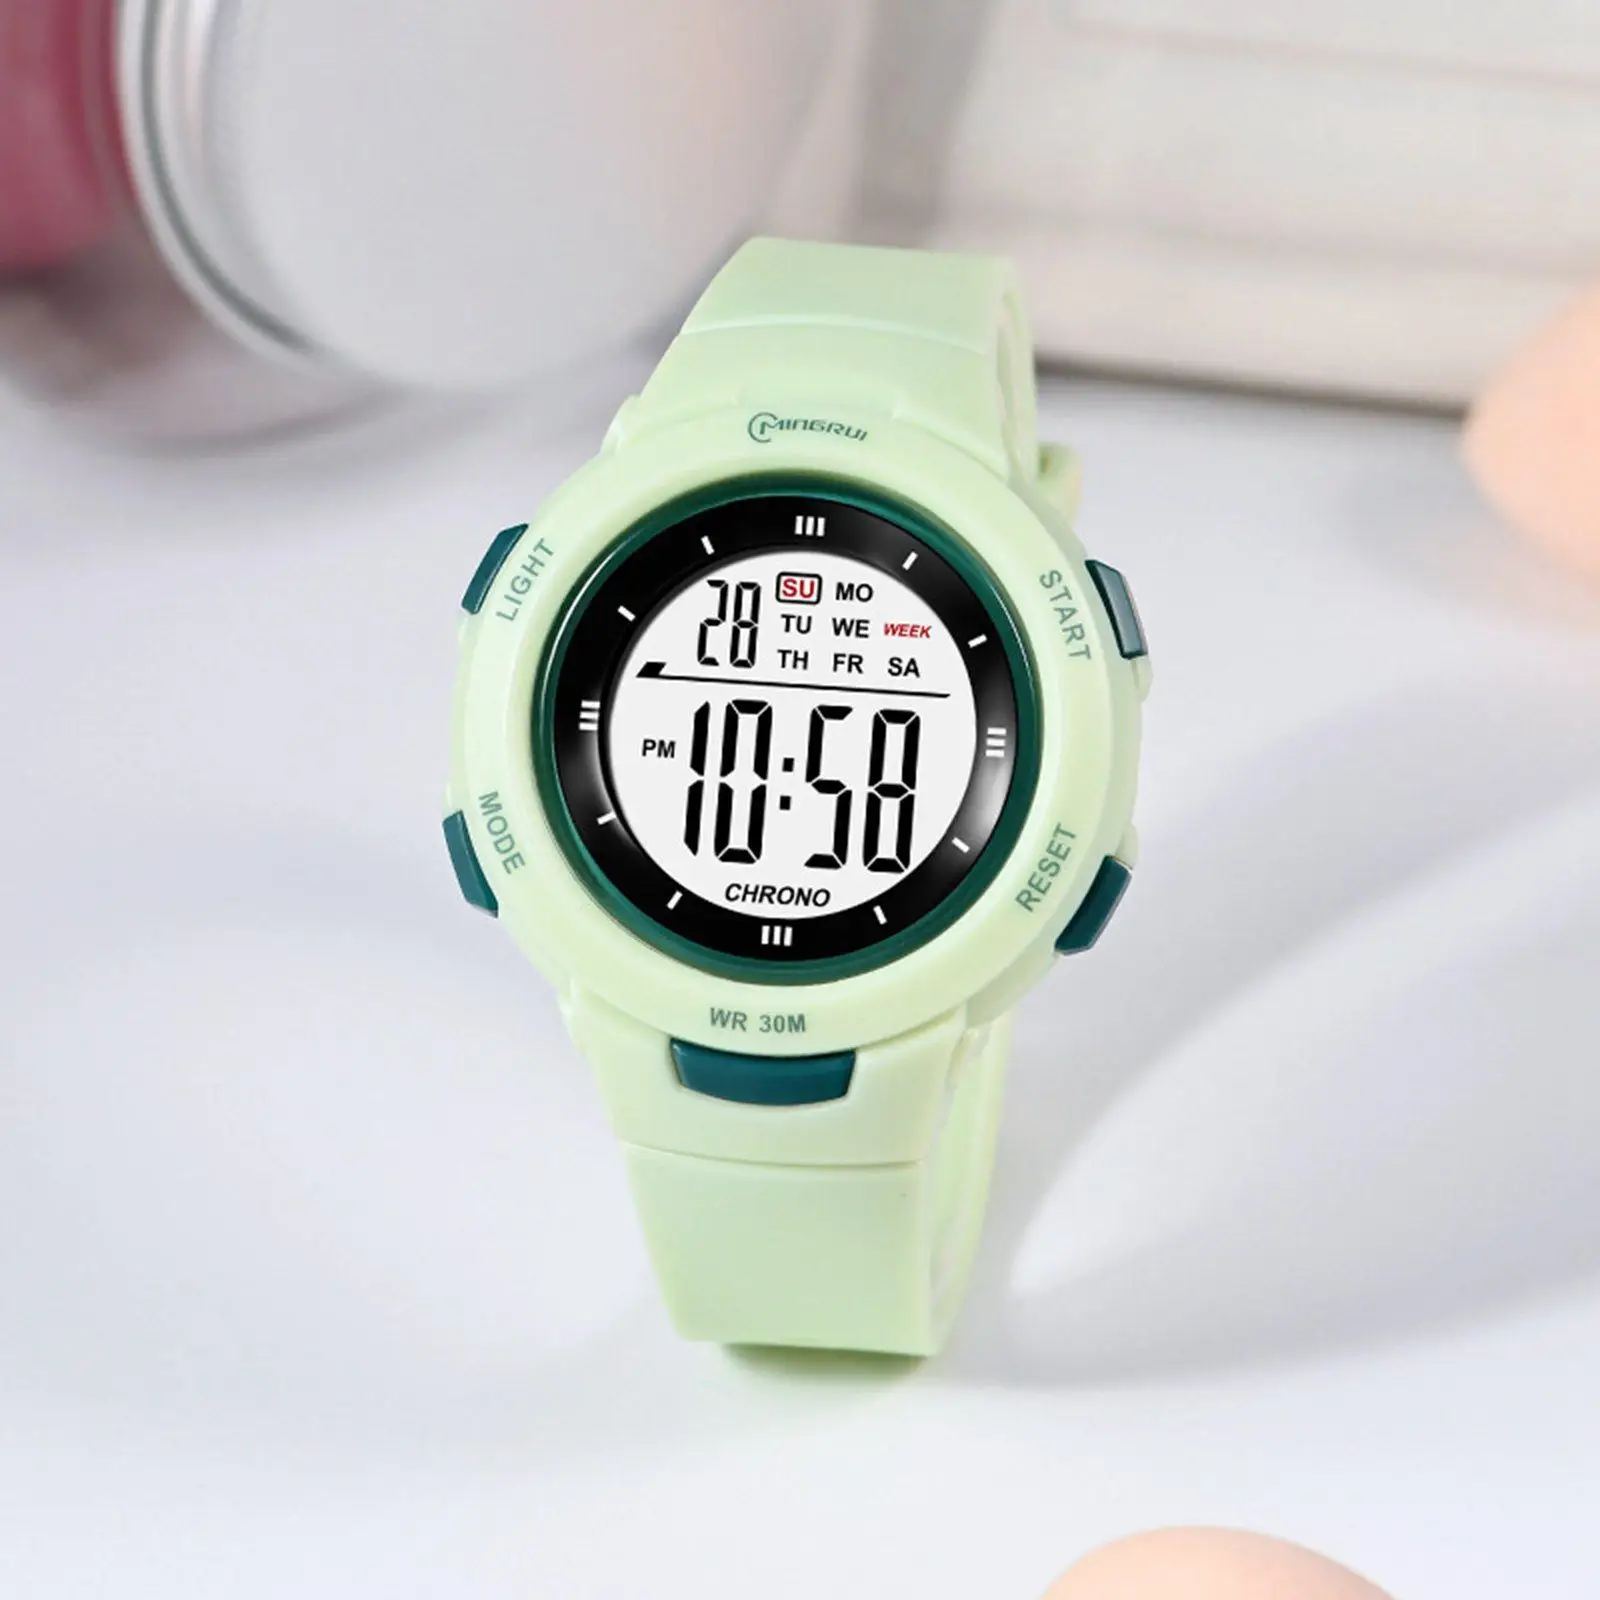 Boys , Outdoor Waterproof Electronic Watches, Wrist Watch with Alarm Stopwatch